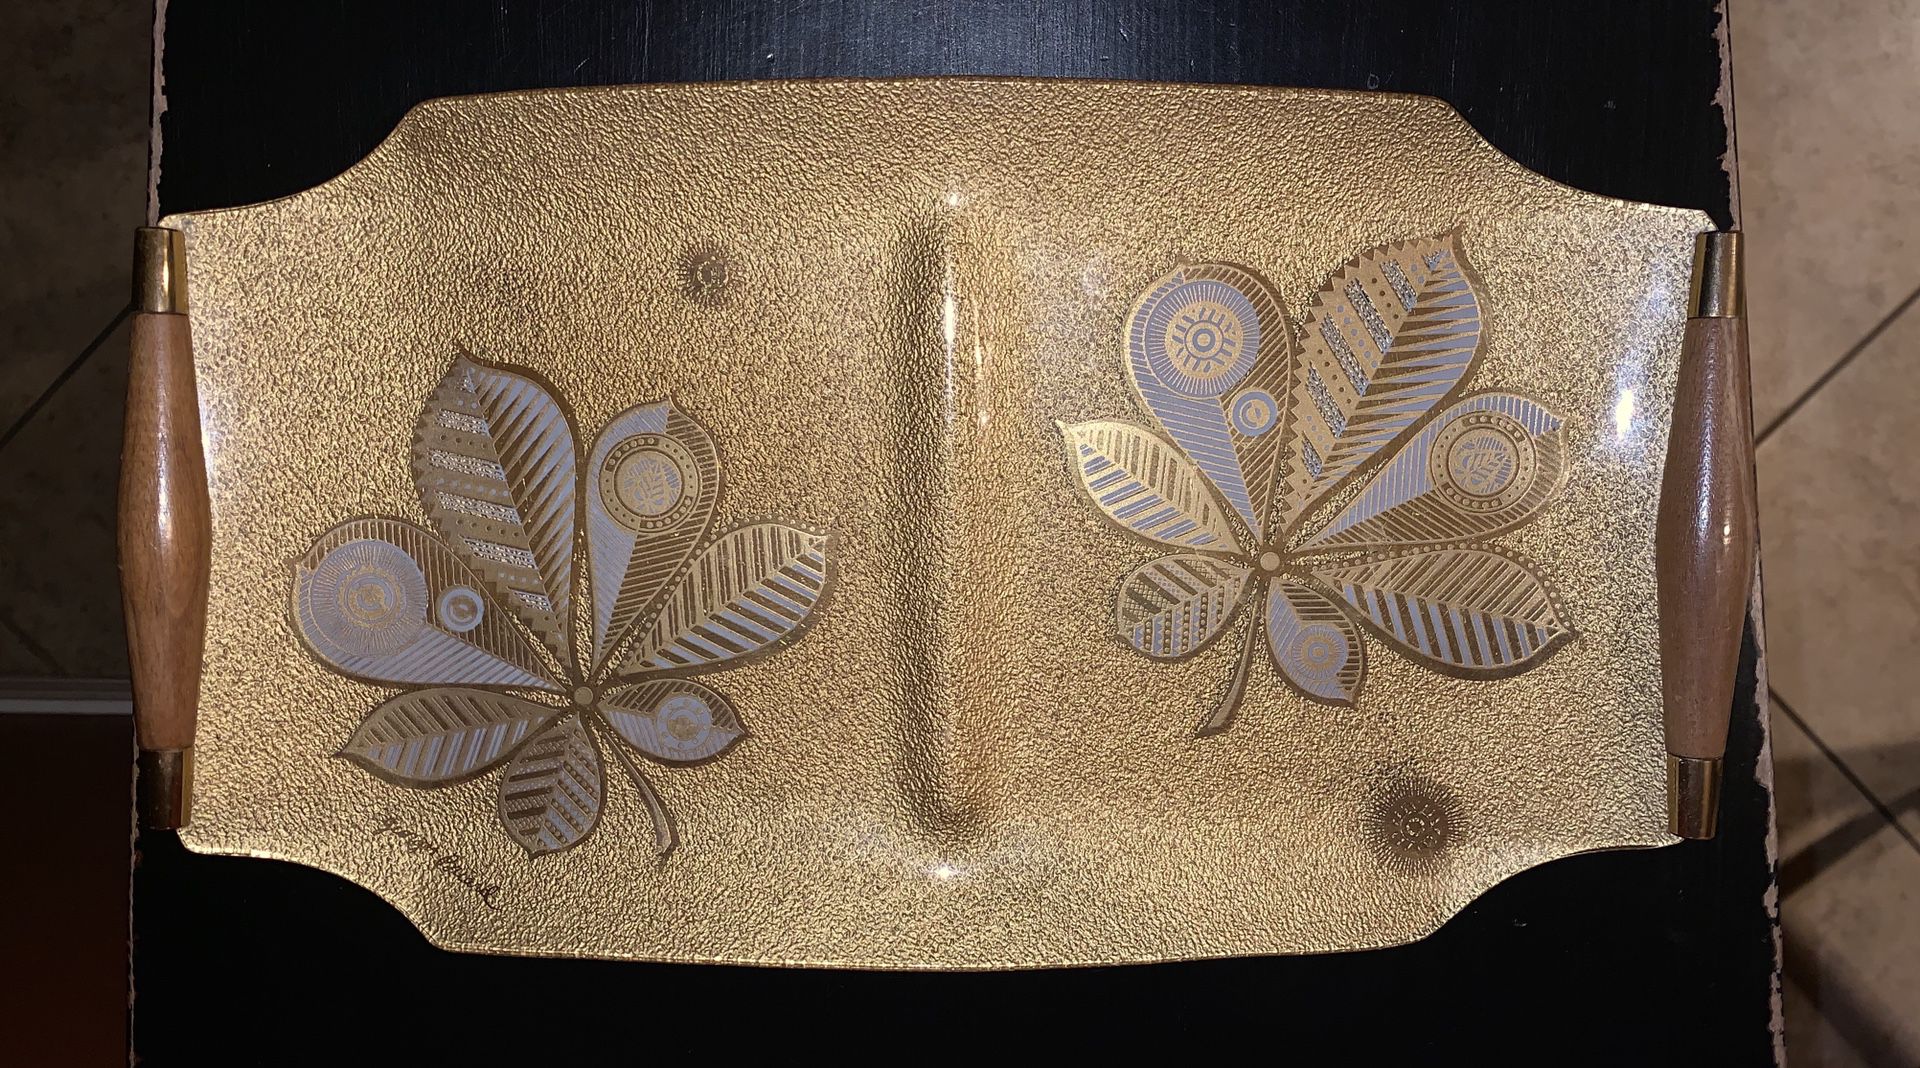 Vintage Mid Century Modern serving tray. Georges Briard. Approximately 15” x 8.5”.